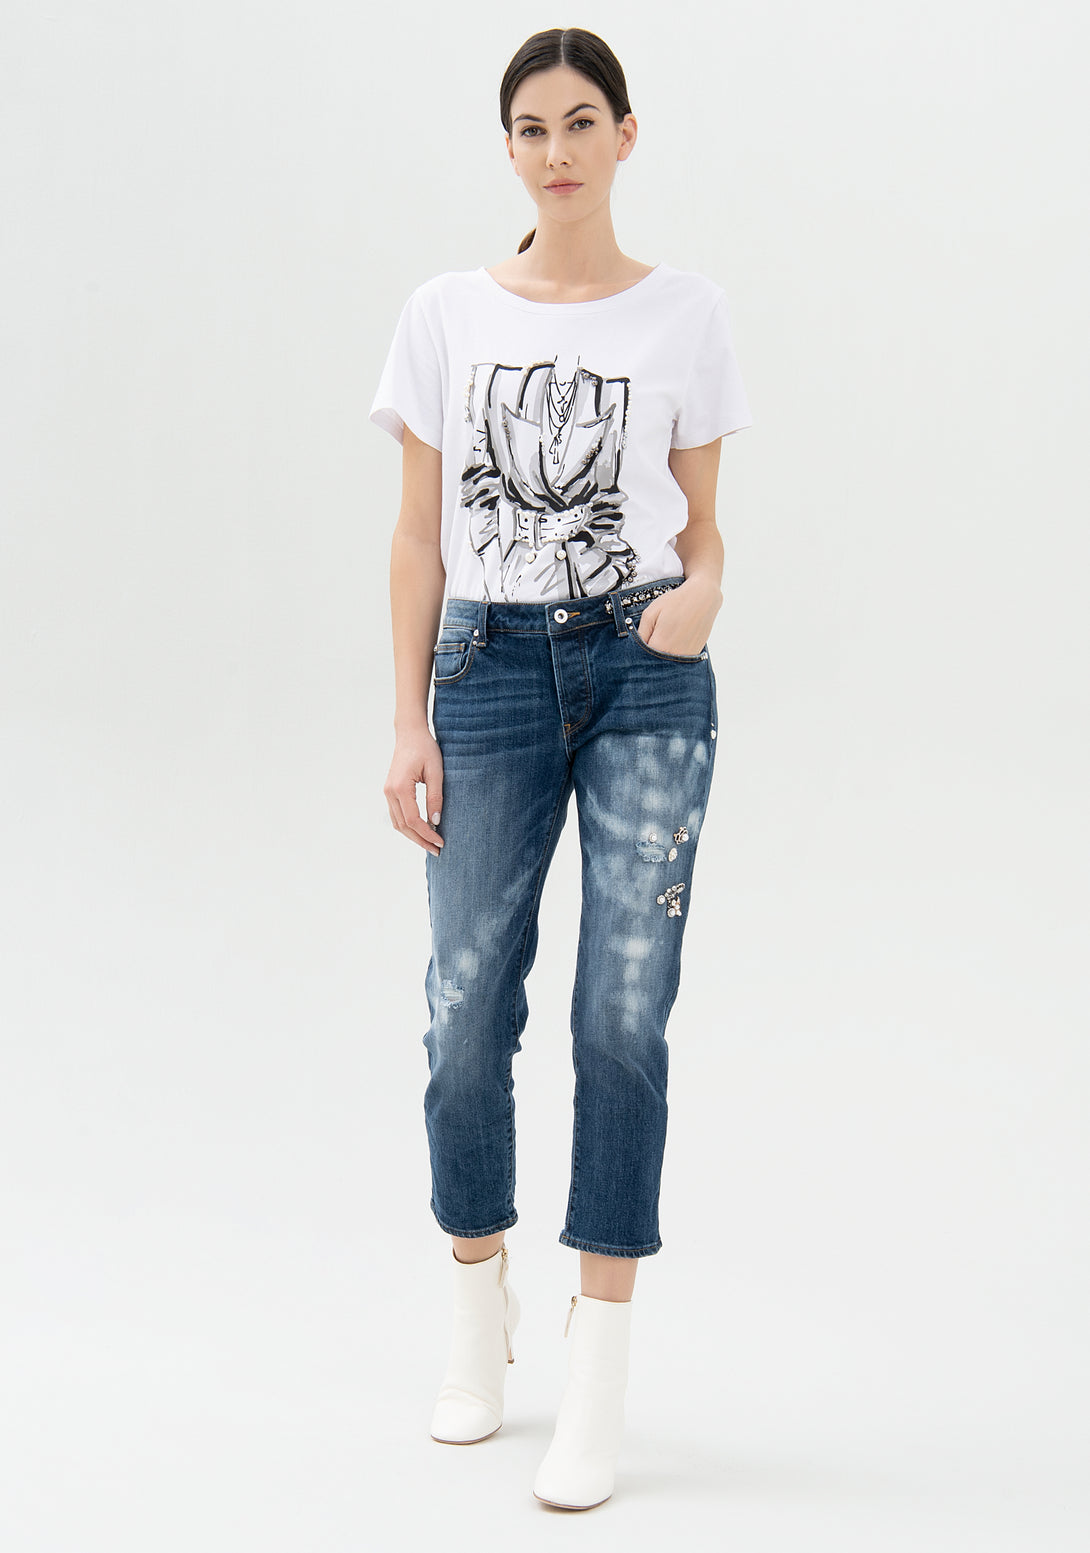 Jeans loose fit cropped made in denim with dark wash